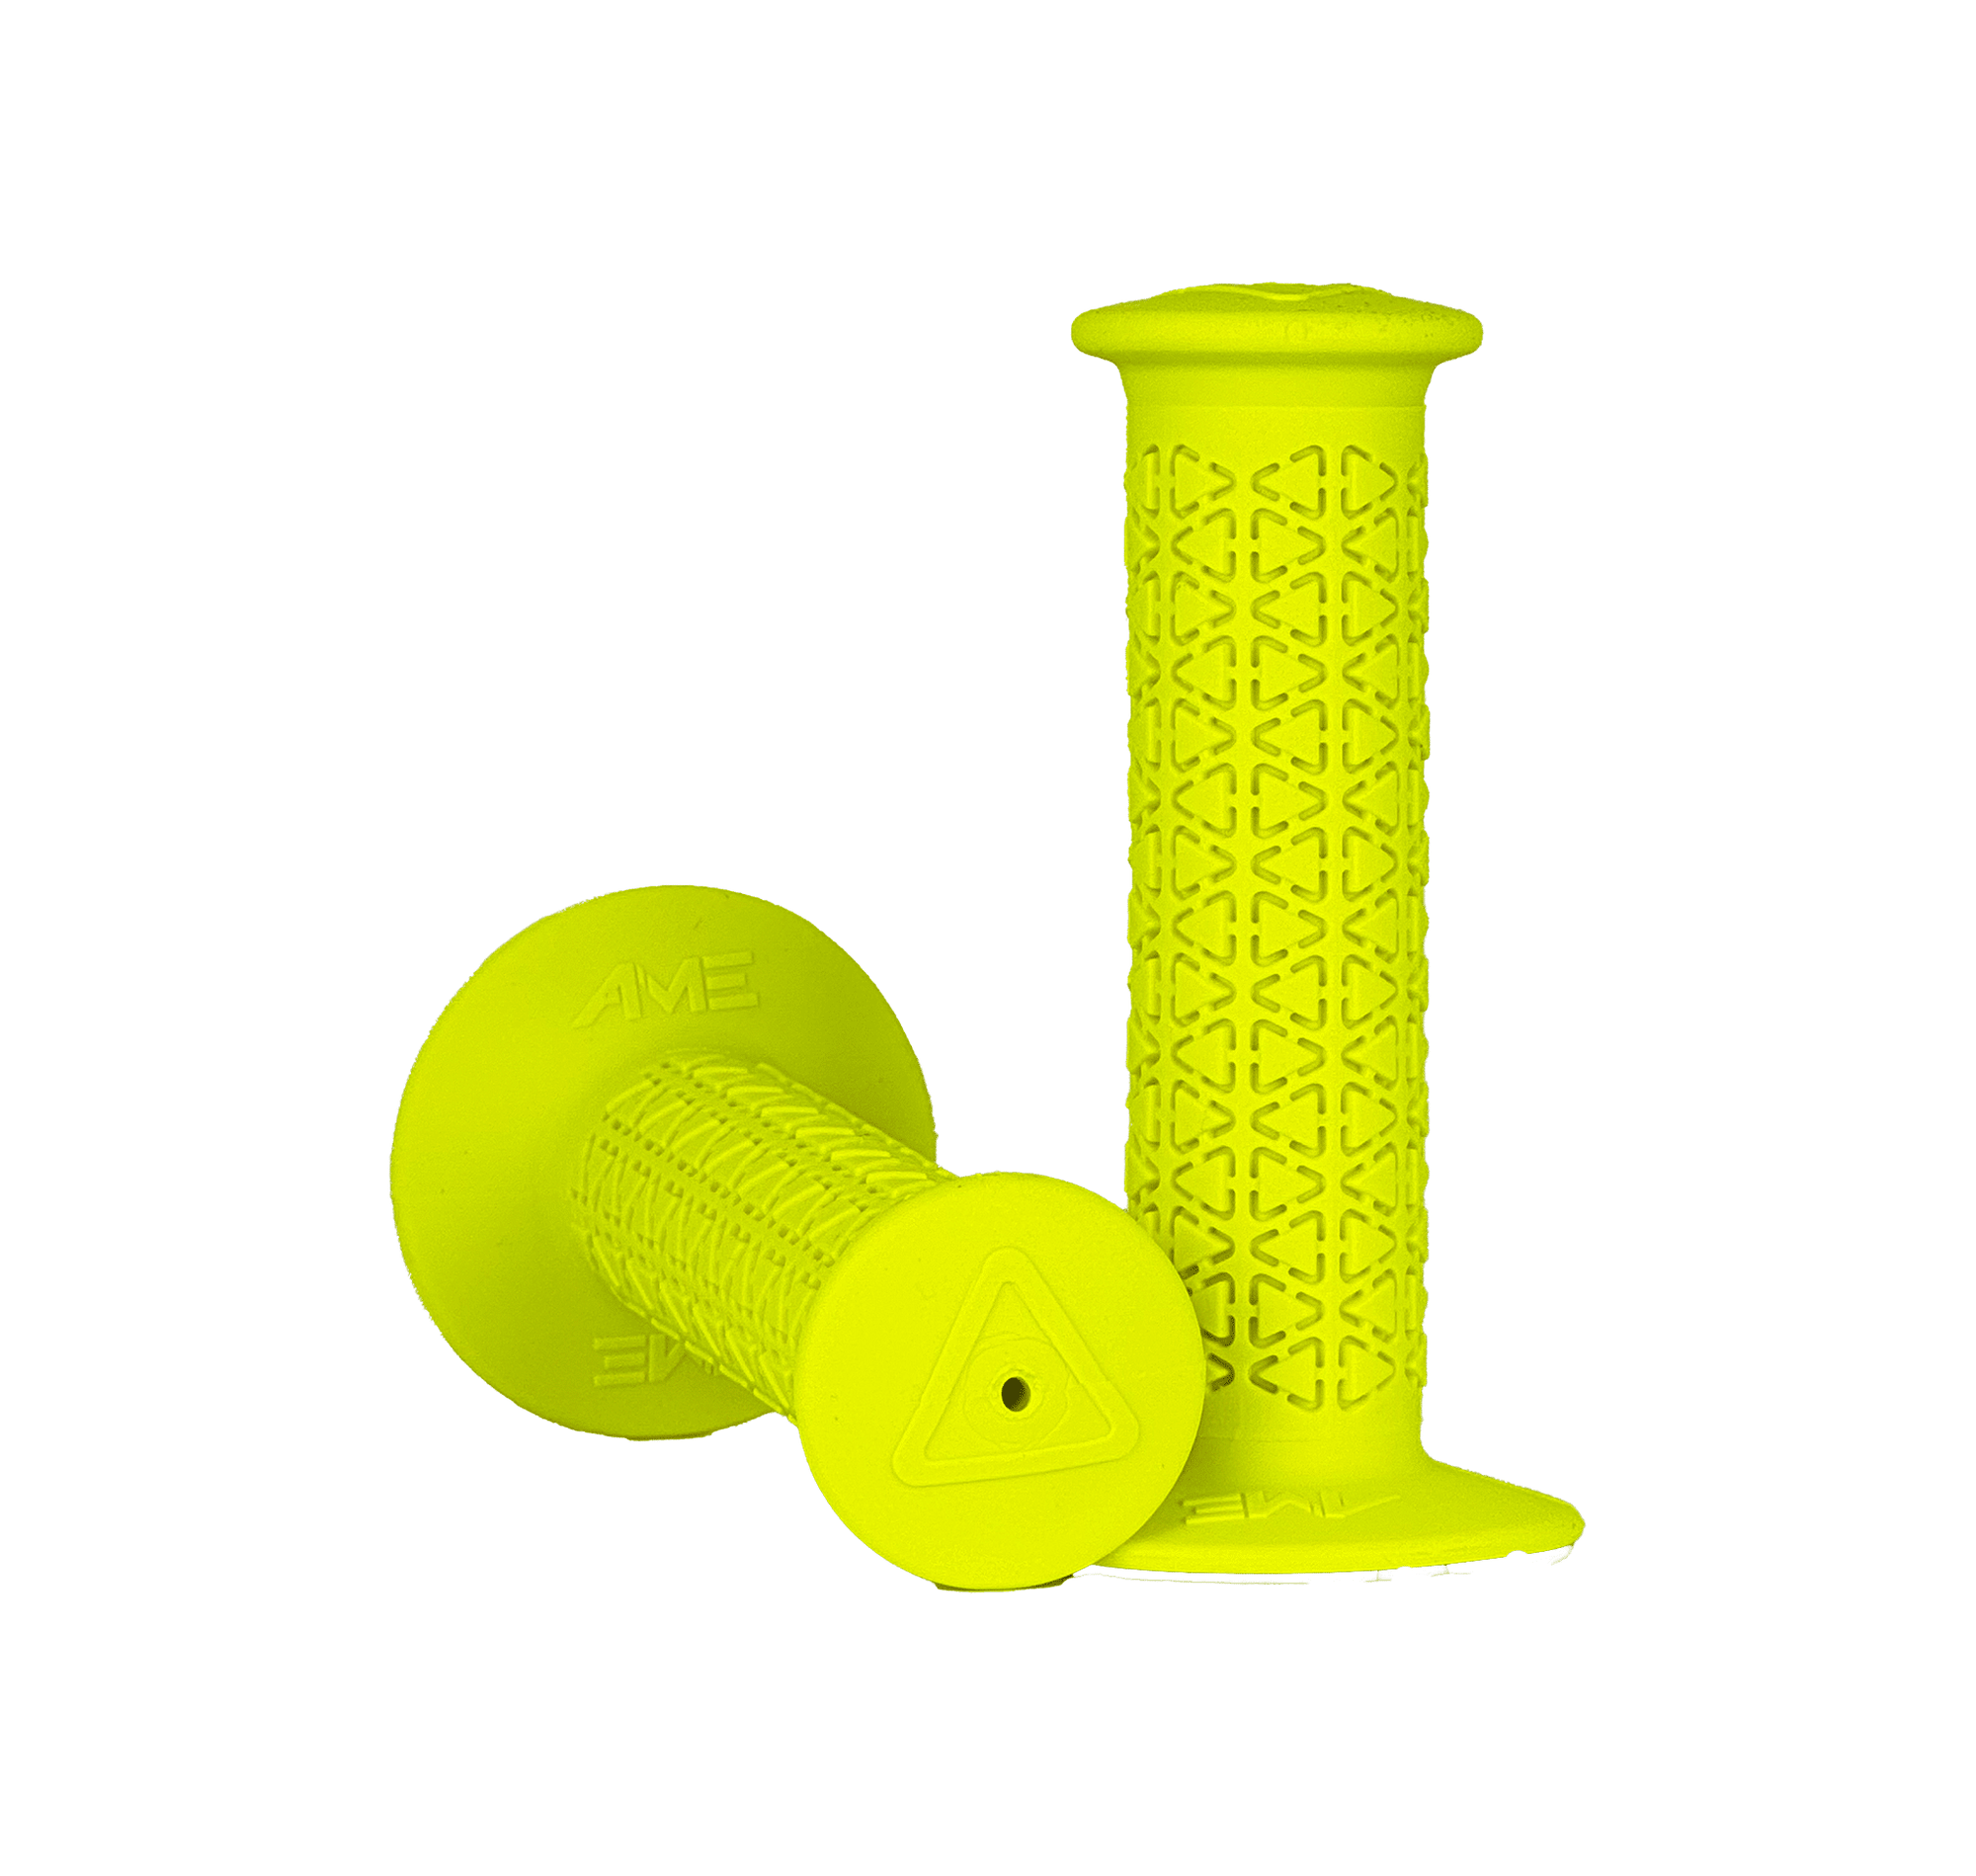 AME Rounds BMX Grips - Fluorescent Yellow - USA Made